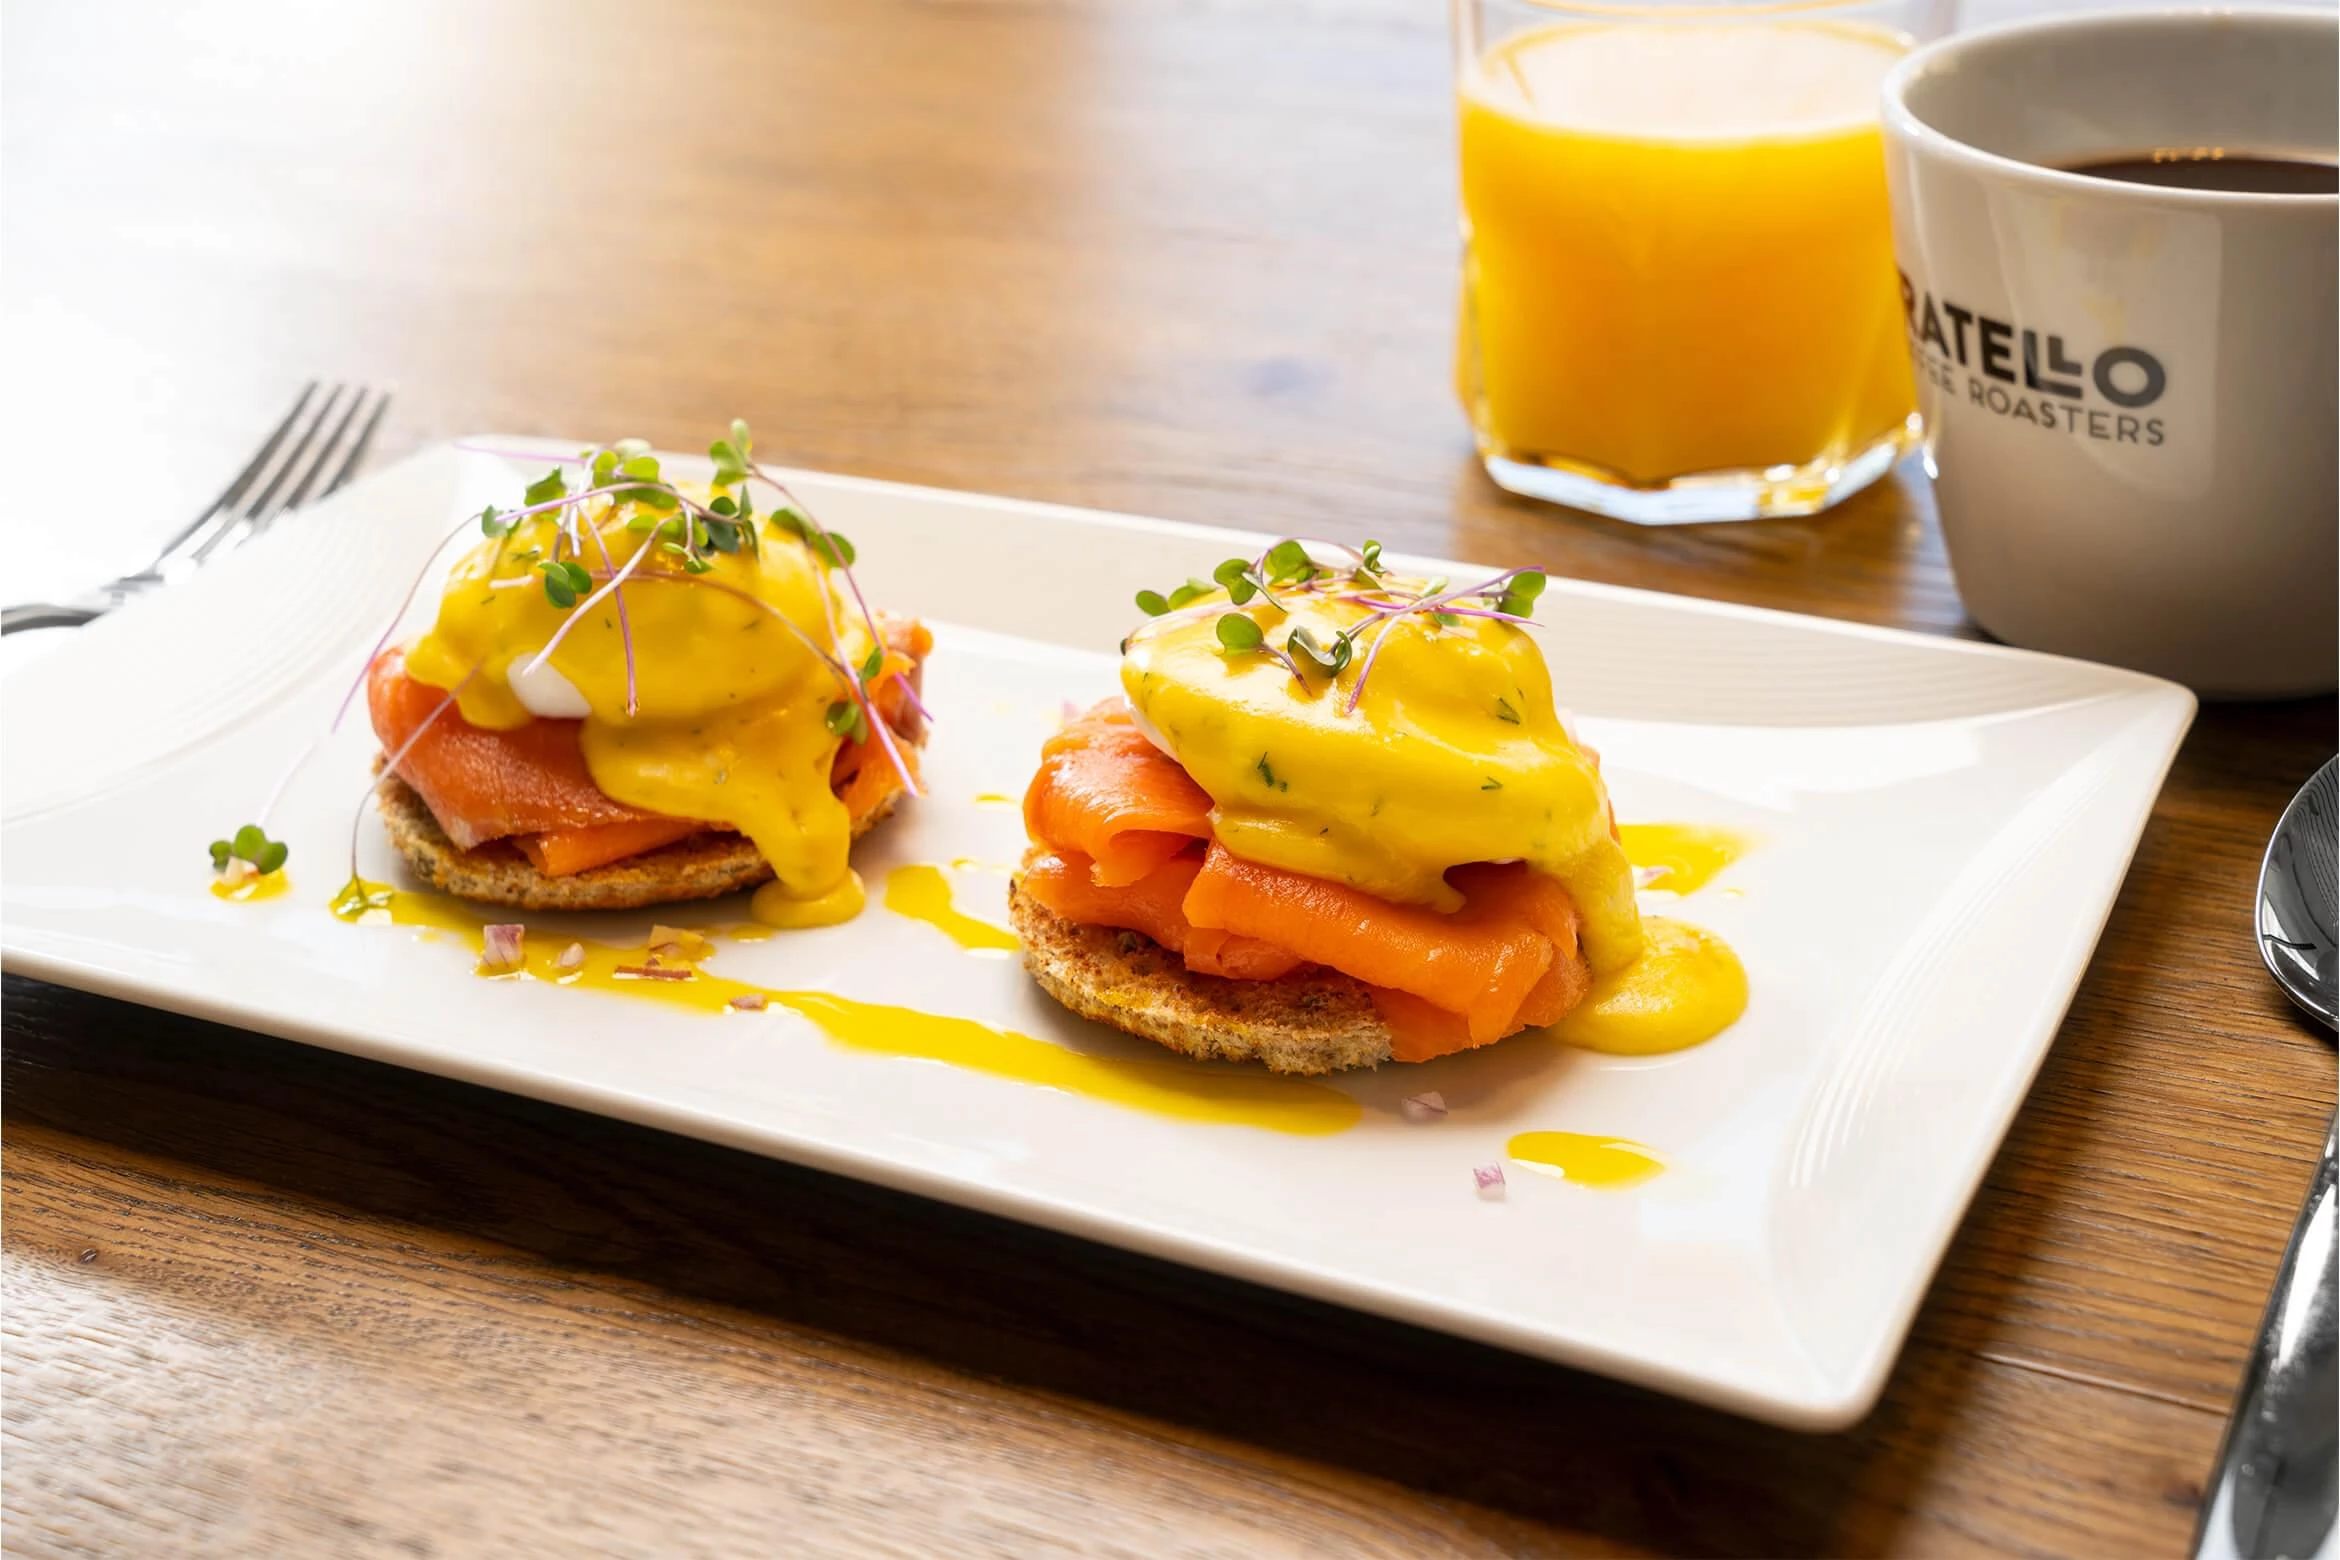 A plate featuring smoked salmon Benedict with coffee and orange juice.